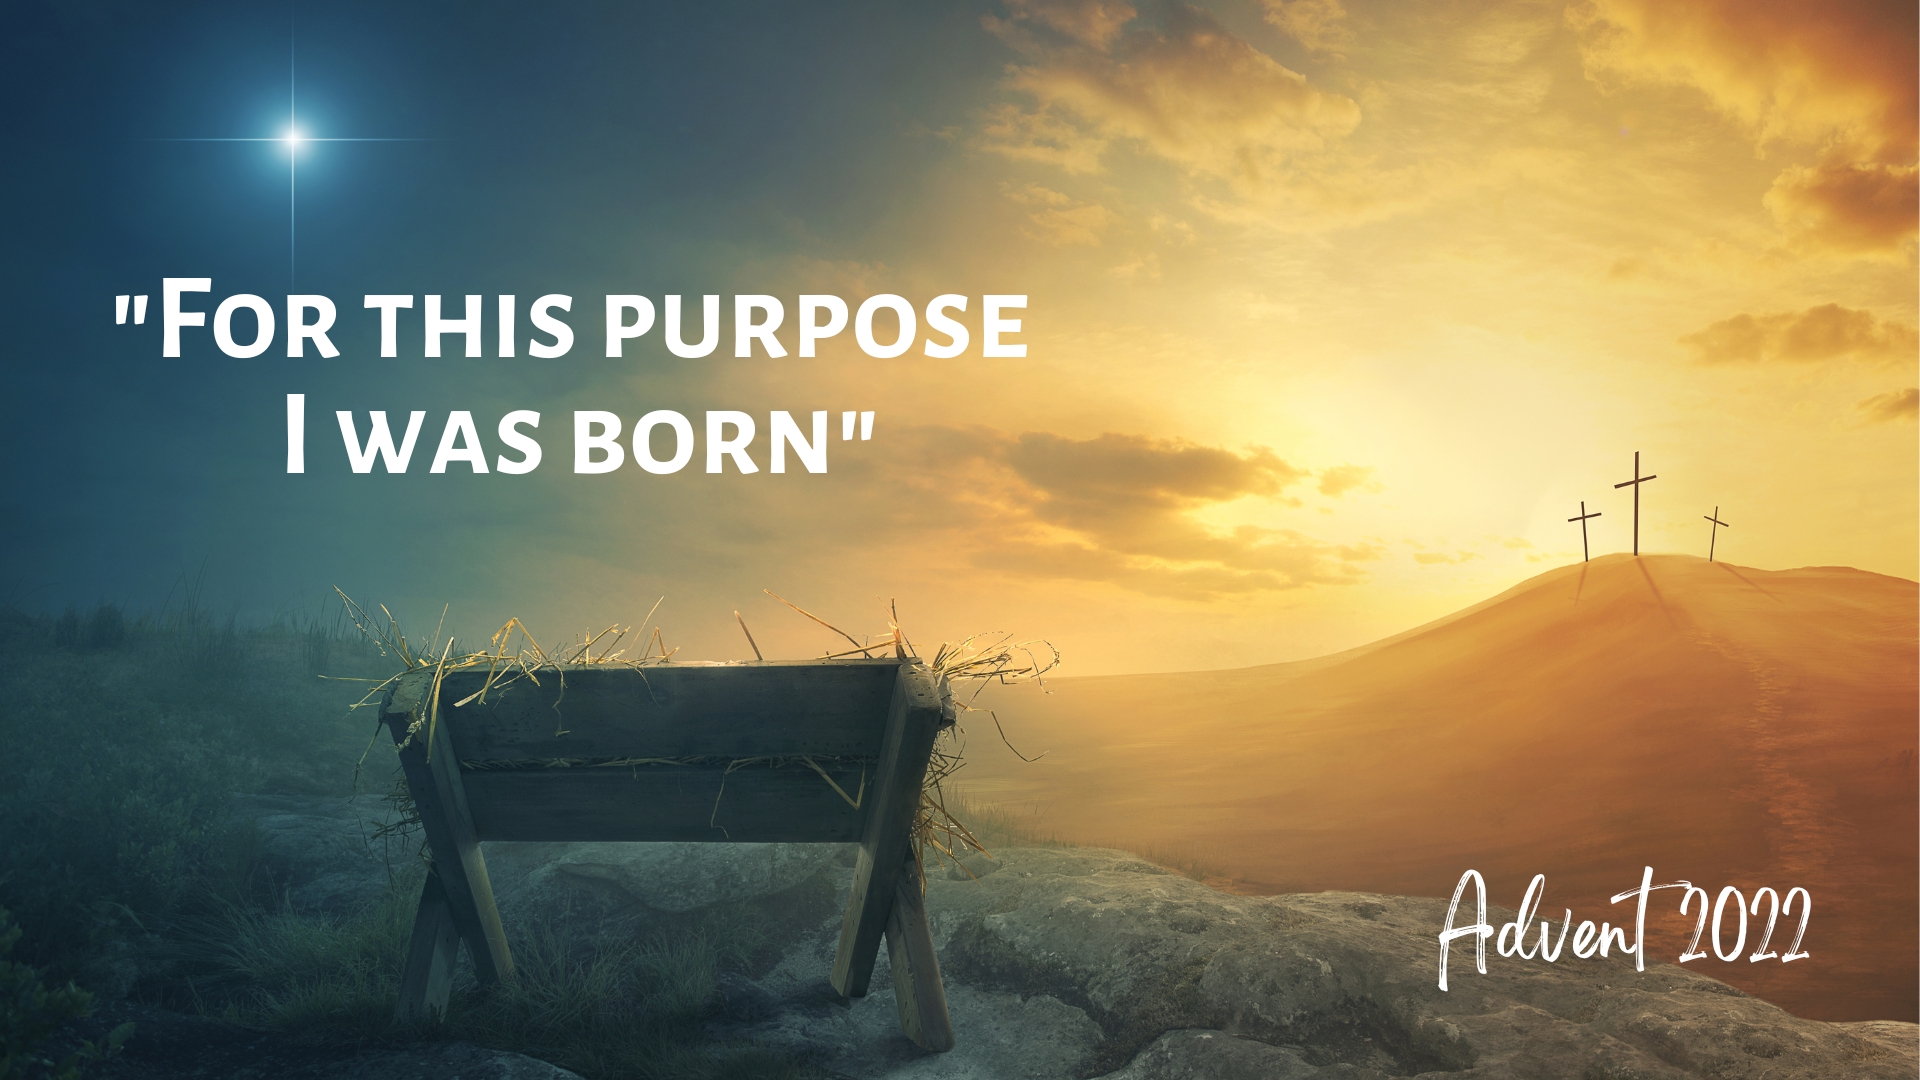 Christ was Born to Secure Joy and Give Gifts